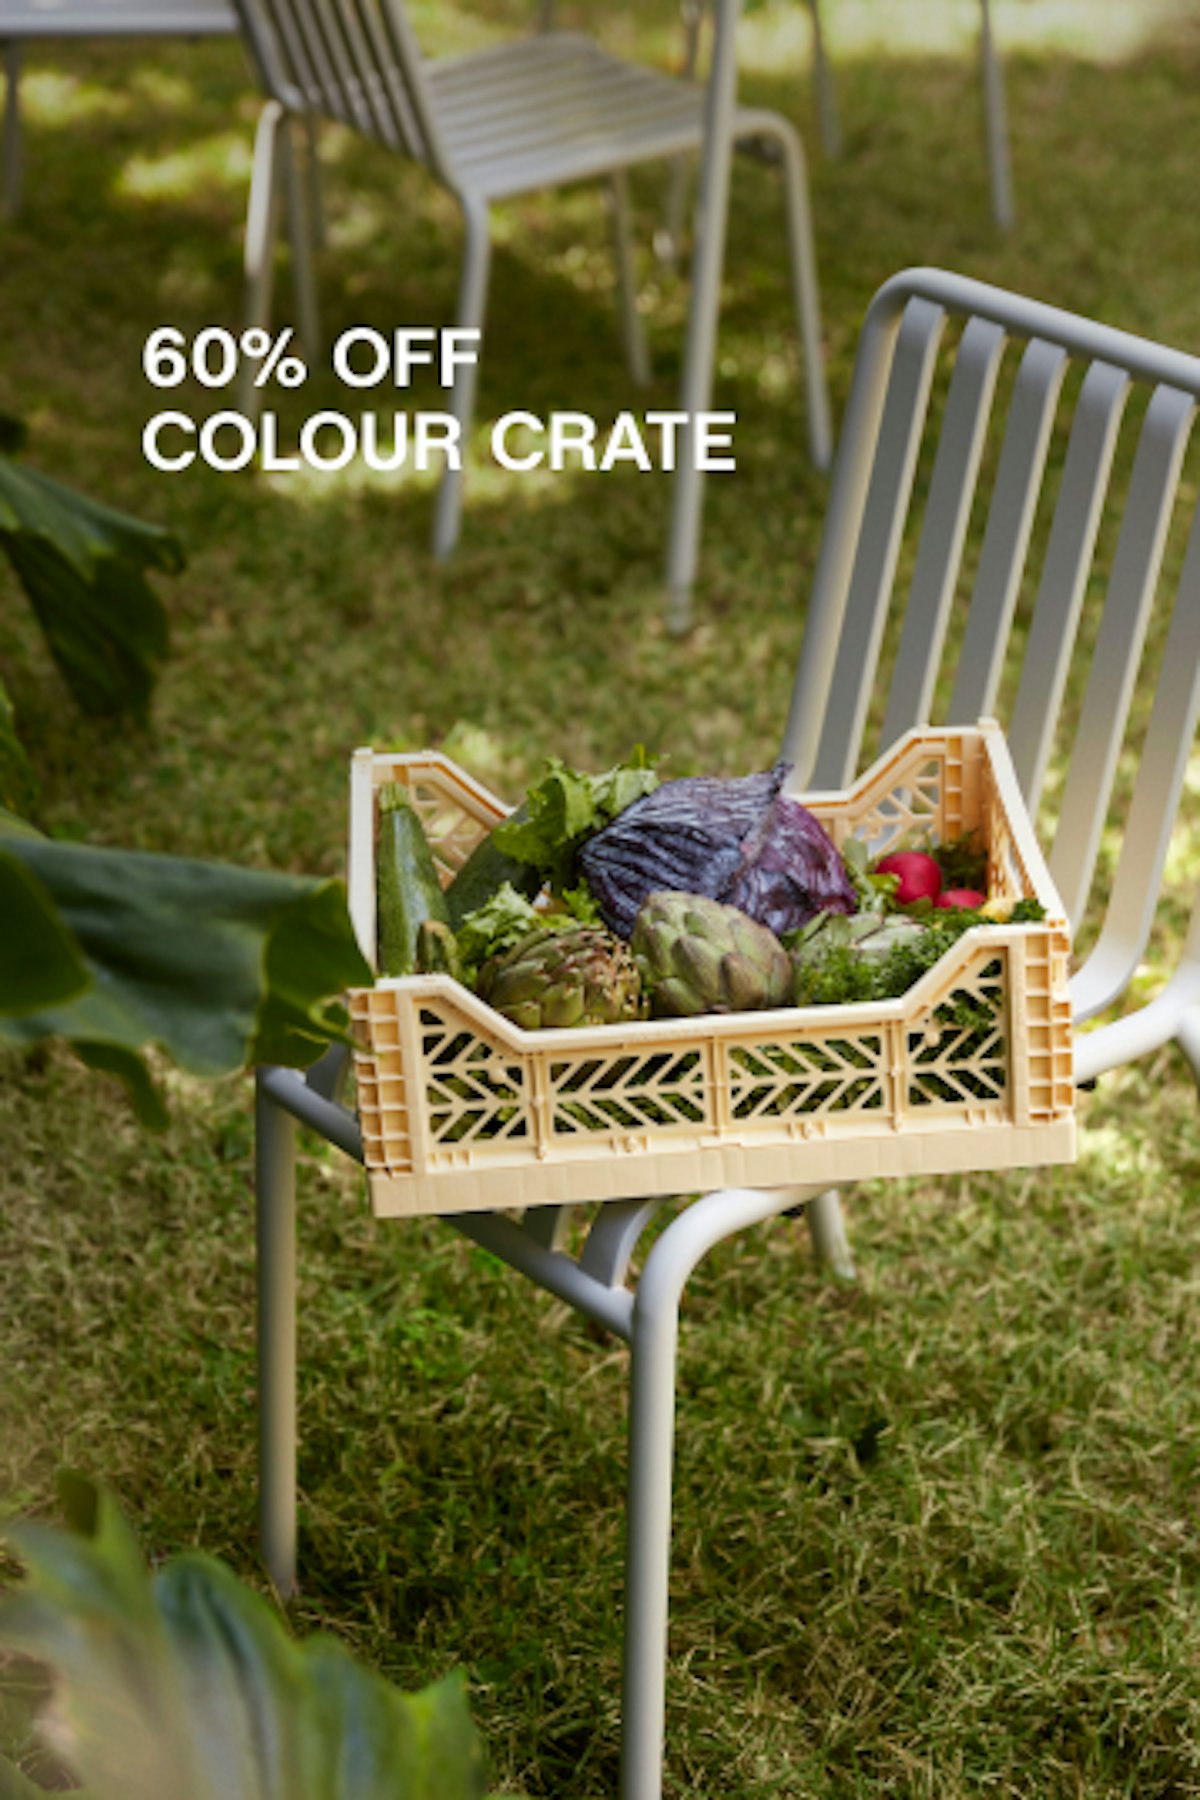 60% OFF COLOUR CRATE